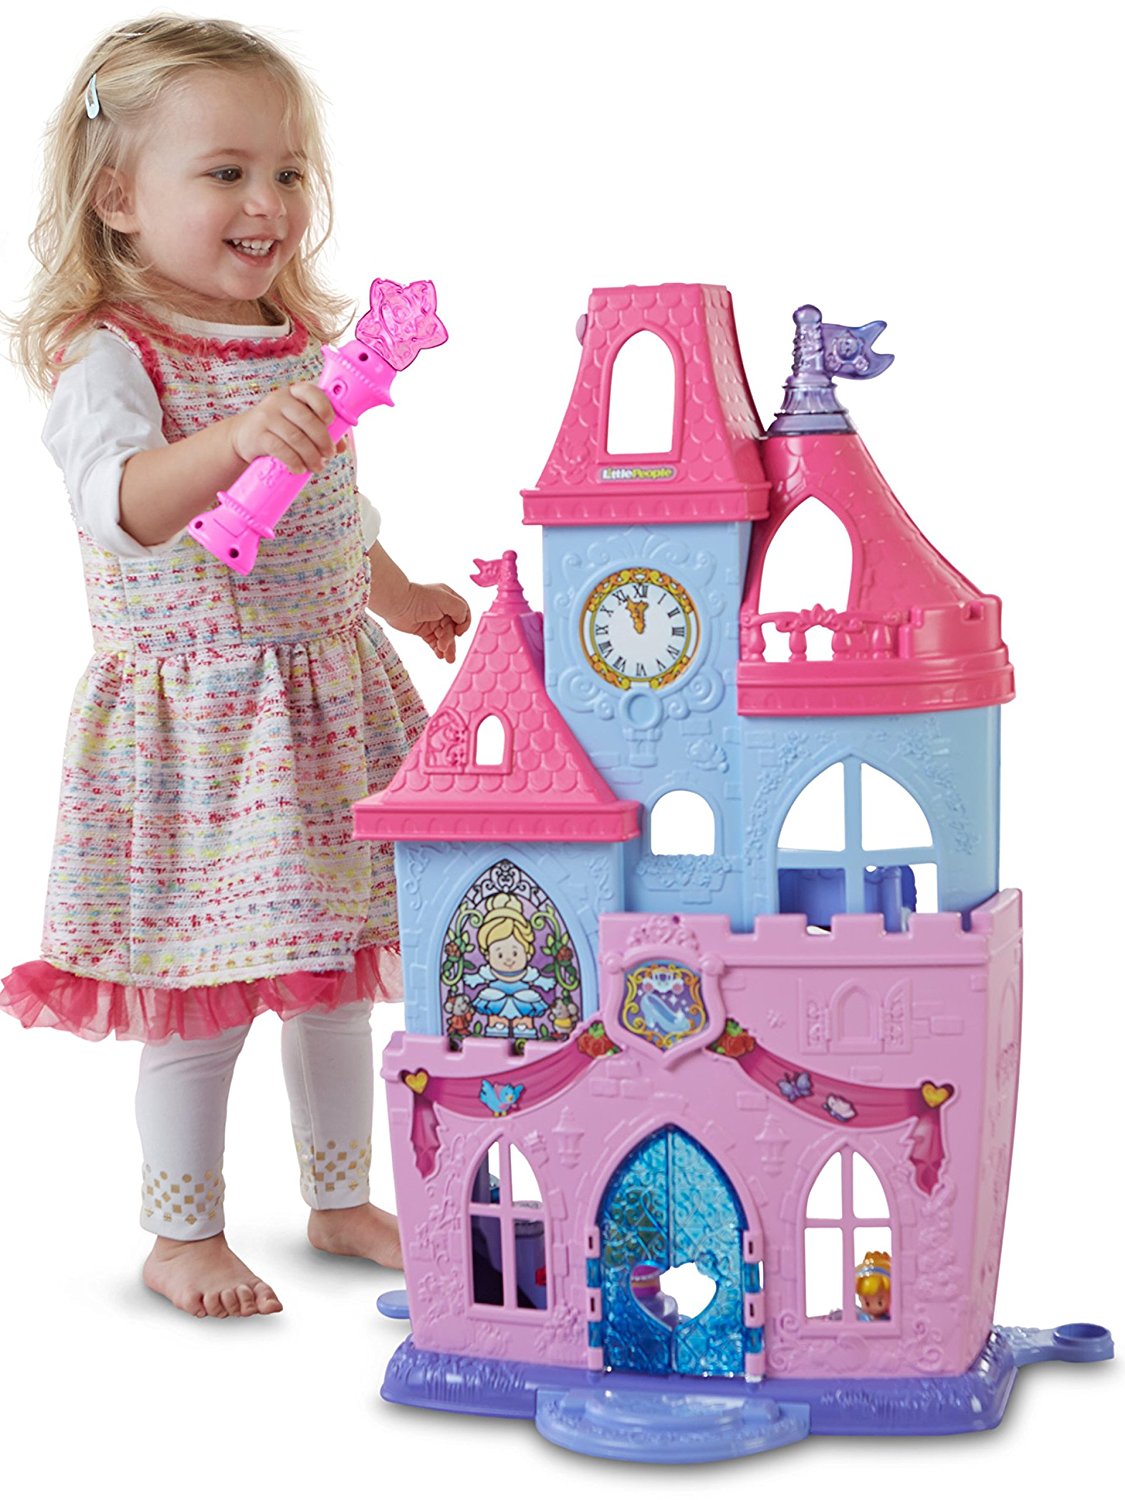 Amazon: Fisher-Price Disney Princess Magical Wand Palace Only $26.99 Shipped! (Reg $49.99) LOWEST PRICE WE’VE SEEN!